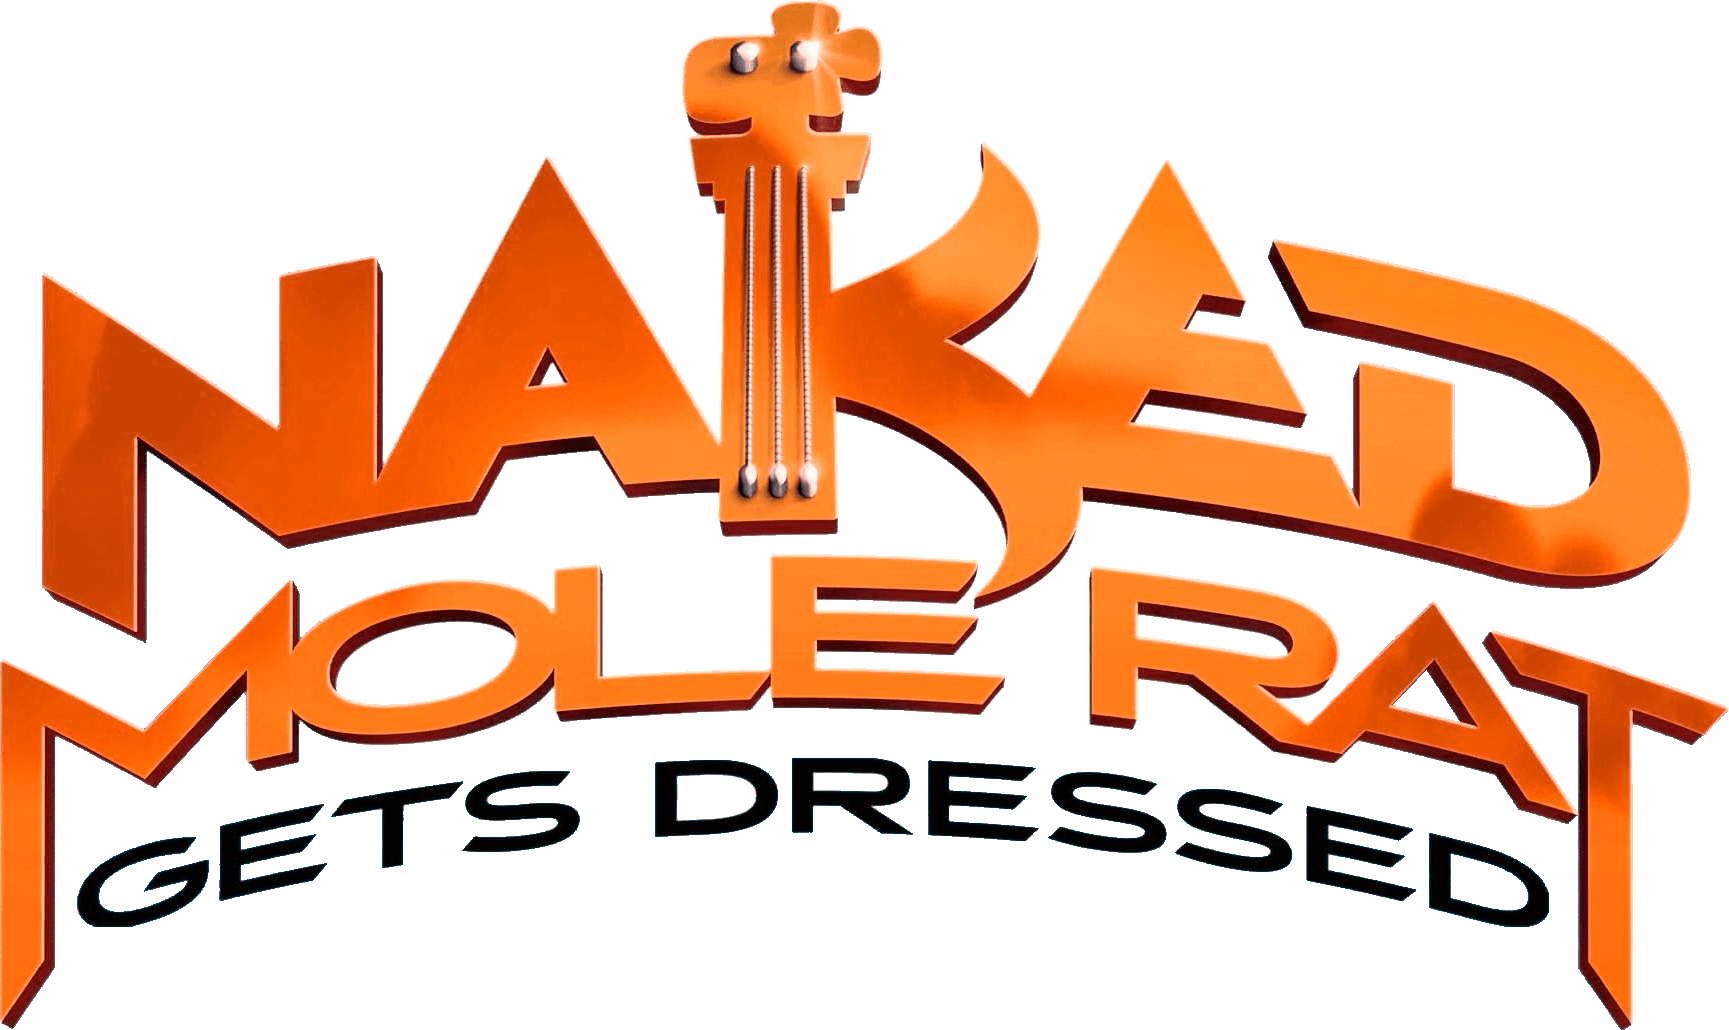 Naked Mole Rat Gets Dressed: The Underground Rock Experience logo